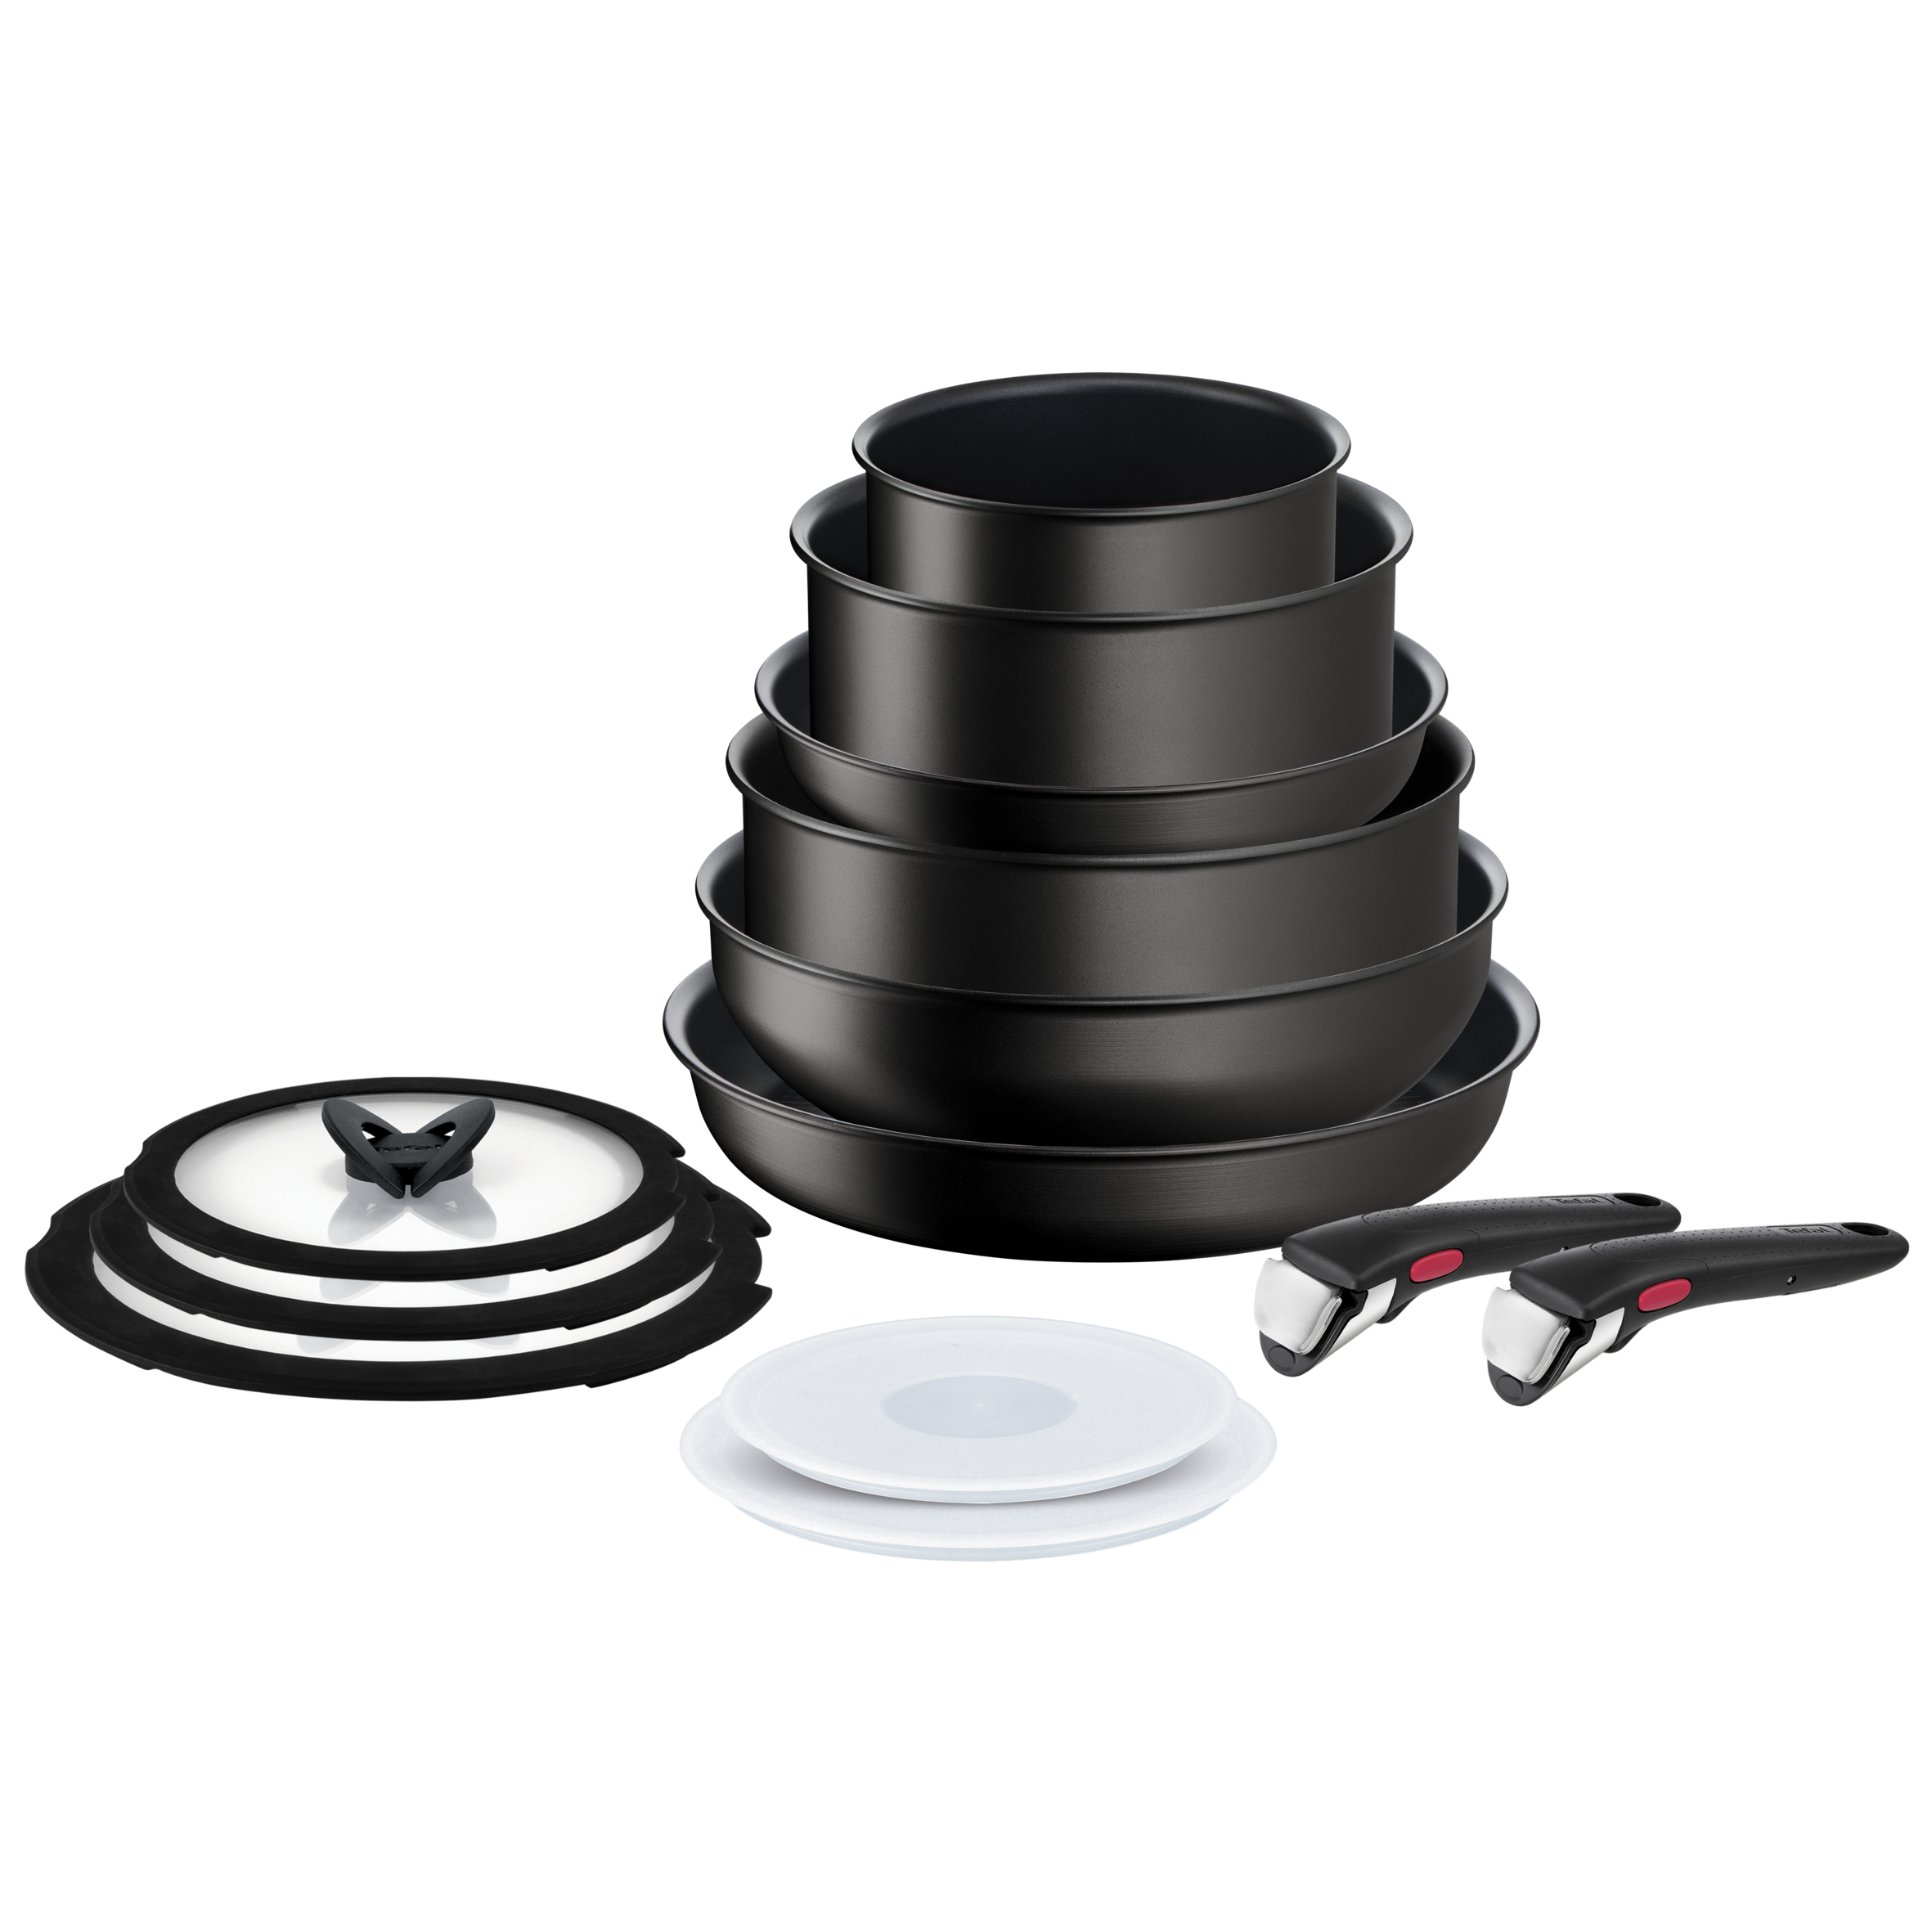 Tefal Ingenio Unlimited Induction Non-Stick 13pc Set